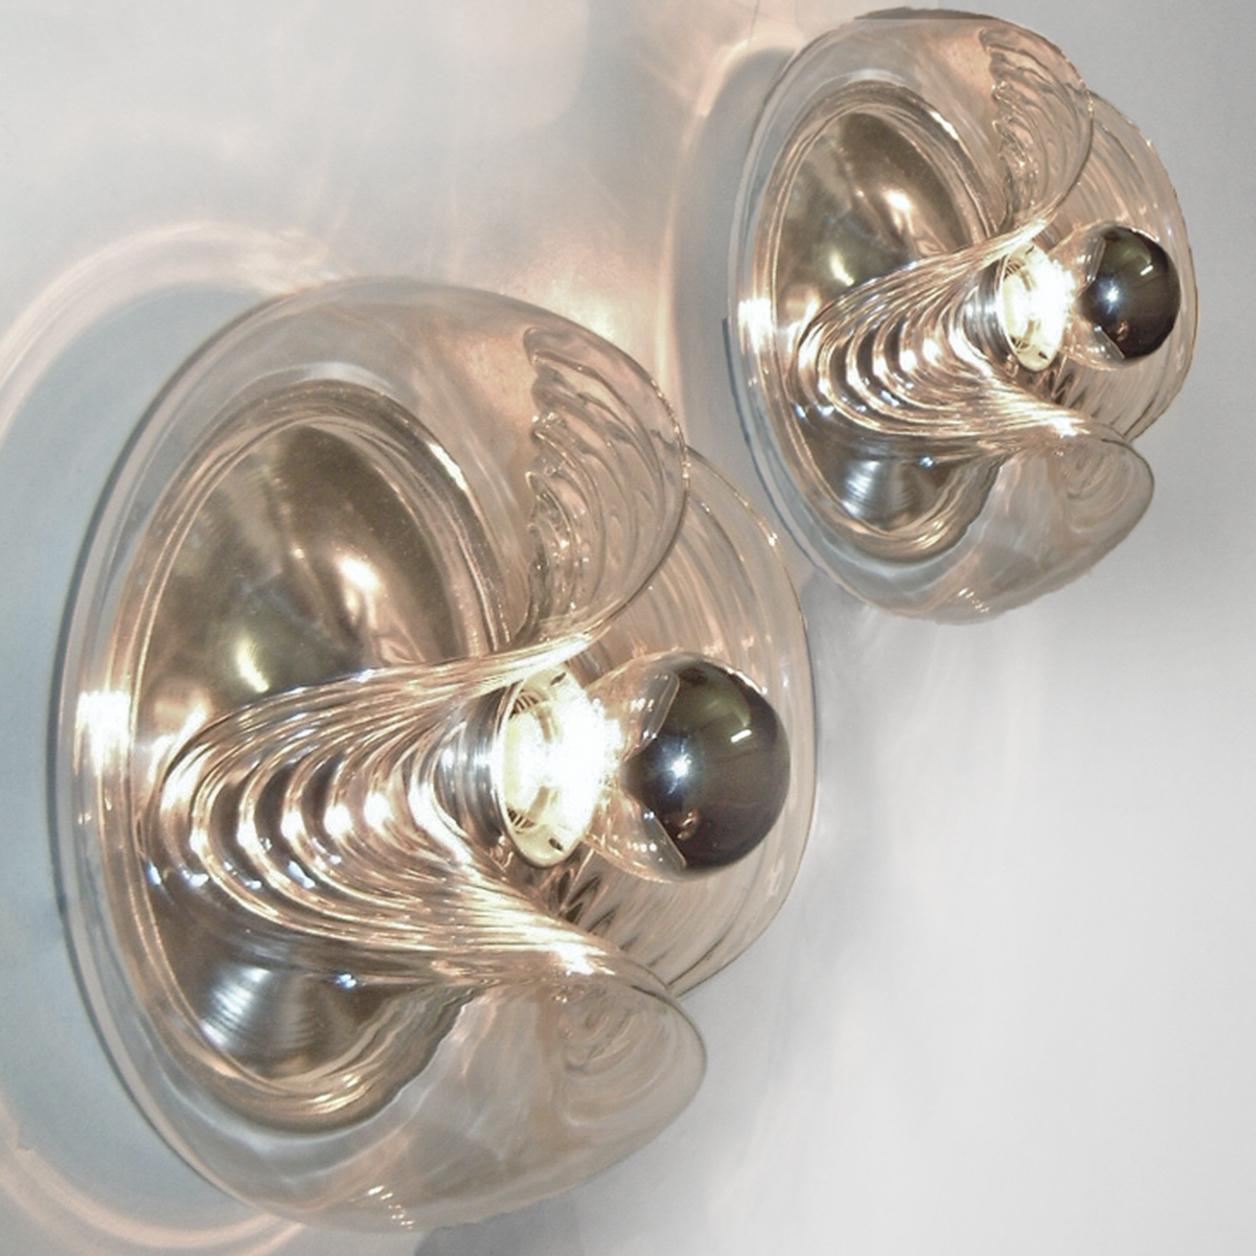 Pair of mid-20th century flushmount or wall sconces designed by Koch & Lowy for Peill & Putzler in the 1970s. Featuring a clear glass globe shade with a waved or ribbed molded bubble form, casting a stunning rippled light across a wall or ceiling.